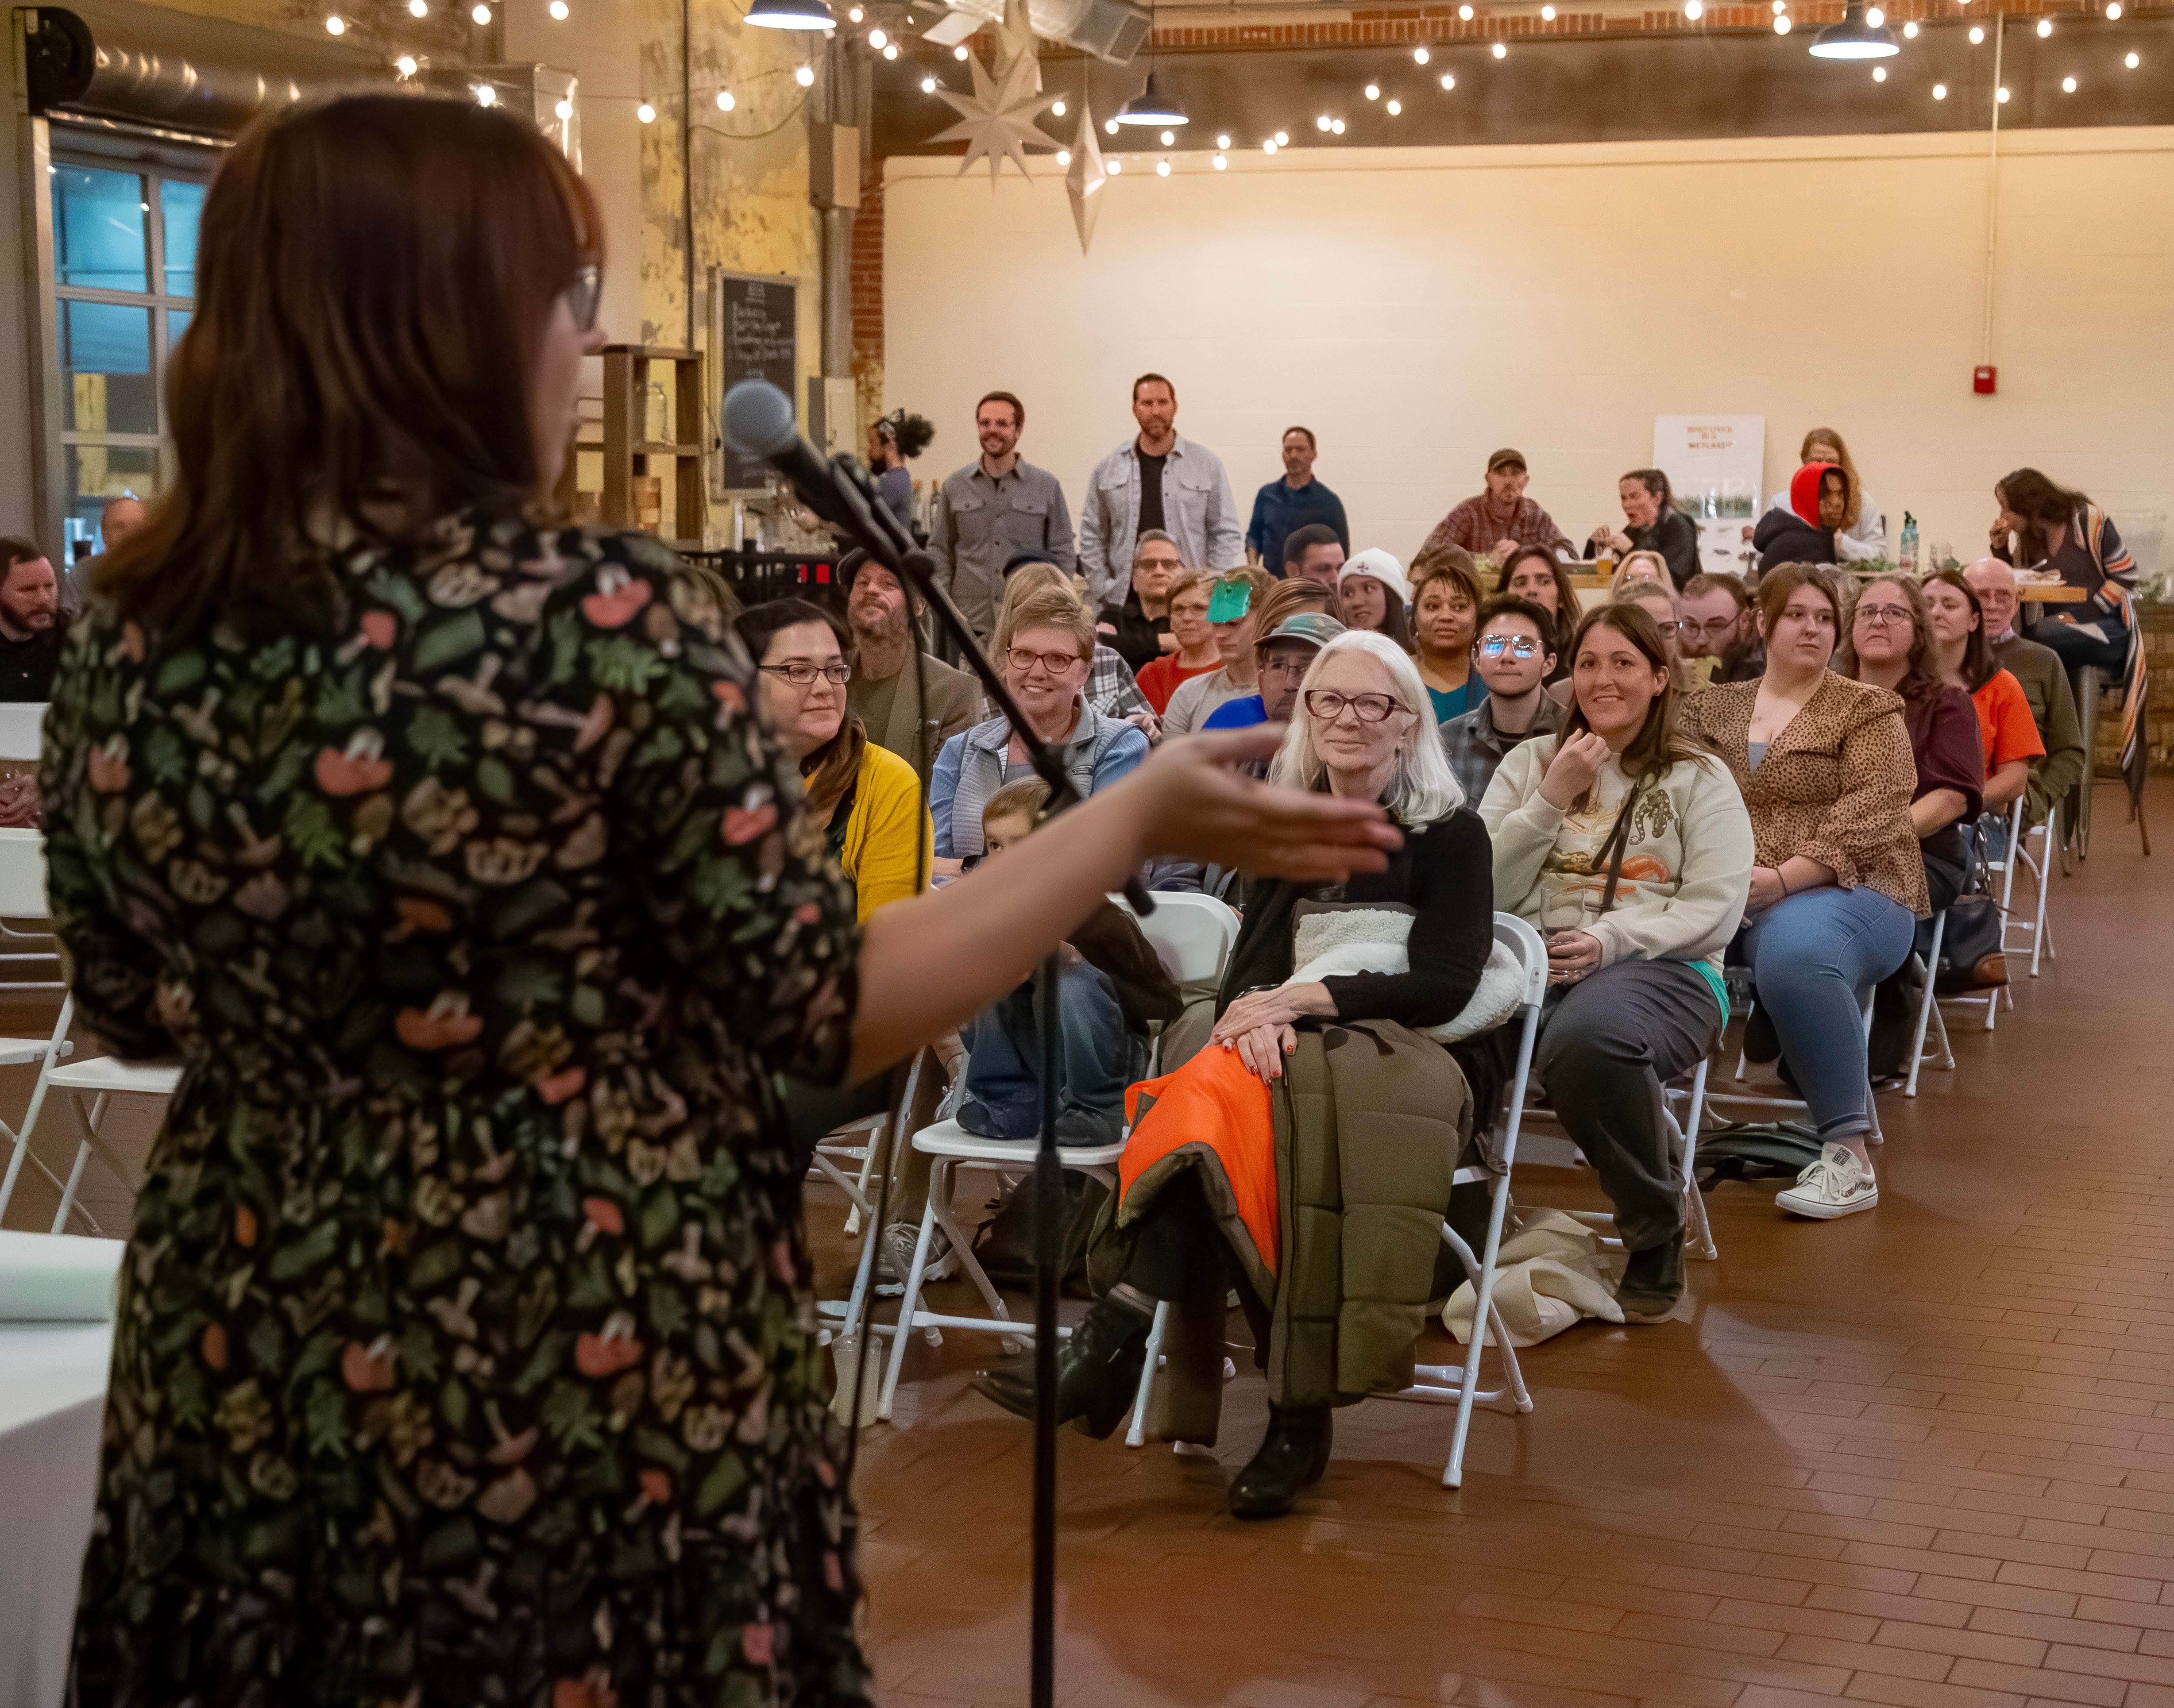 The field premiere of the NGRREC documentary “The Call of the Swamp: Investigating the State Threatened Bird-voiced Treefrog” took place at the Old Bakery Beer Company last fall. JAN DONA/L&C MARKETING & PR